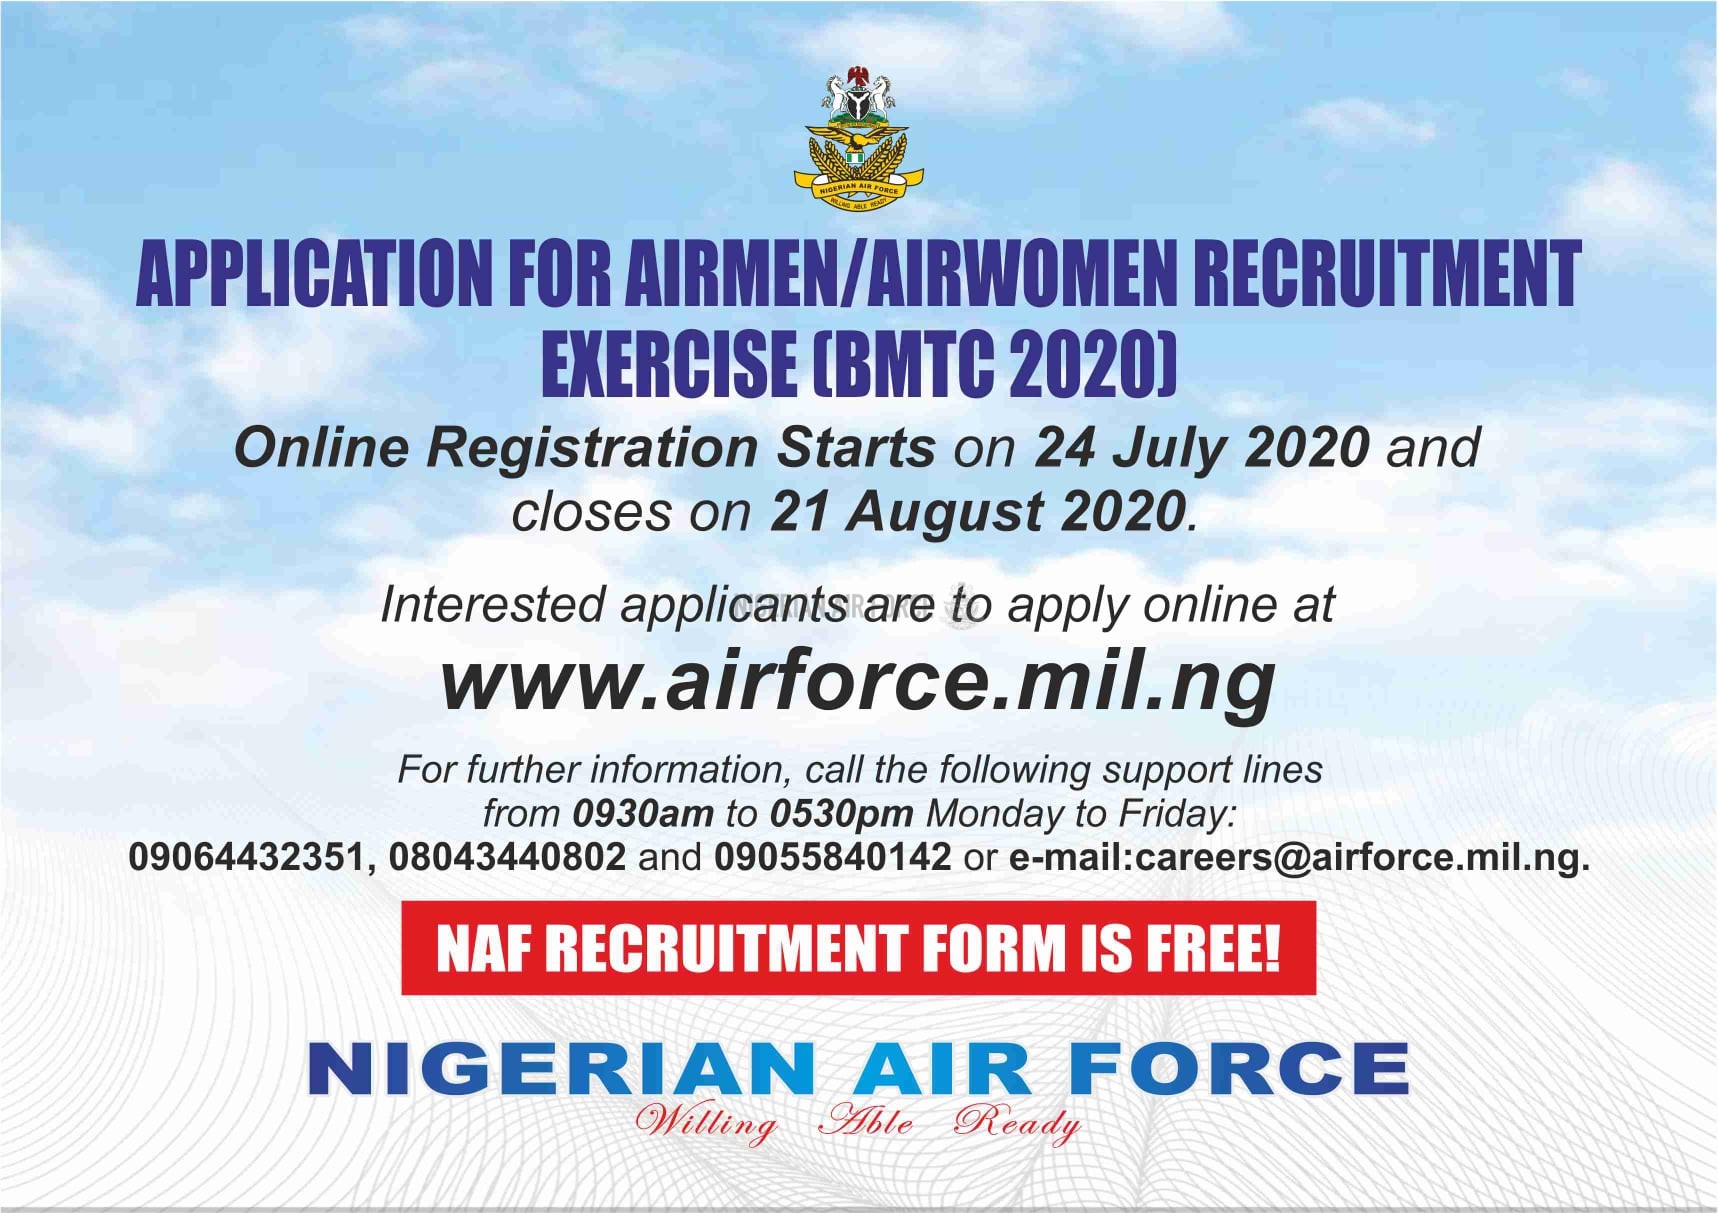 NAF ONLINE RECRUITMENT TO COMMENCE 24 JULY 2020